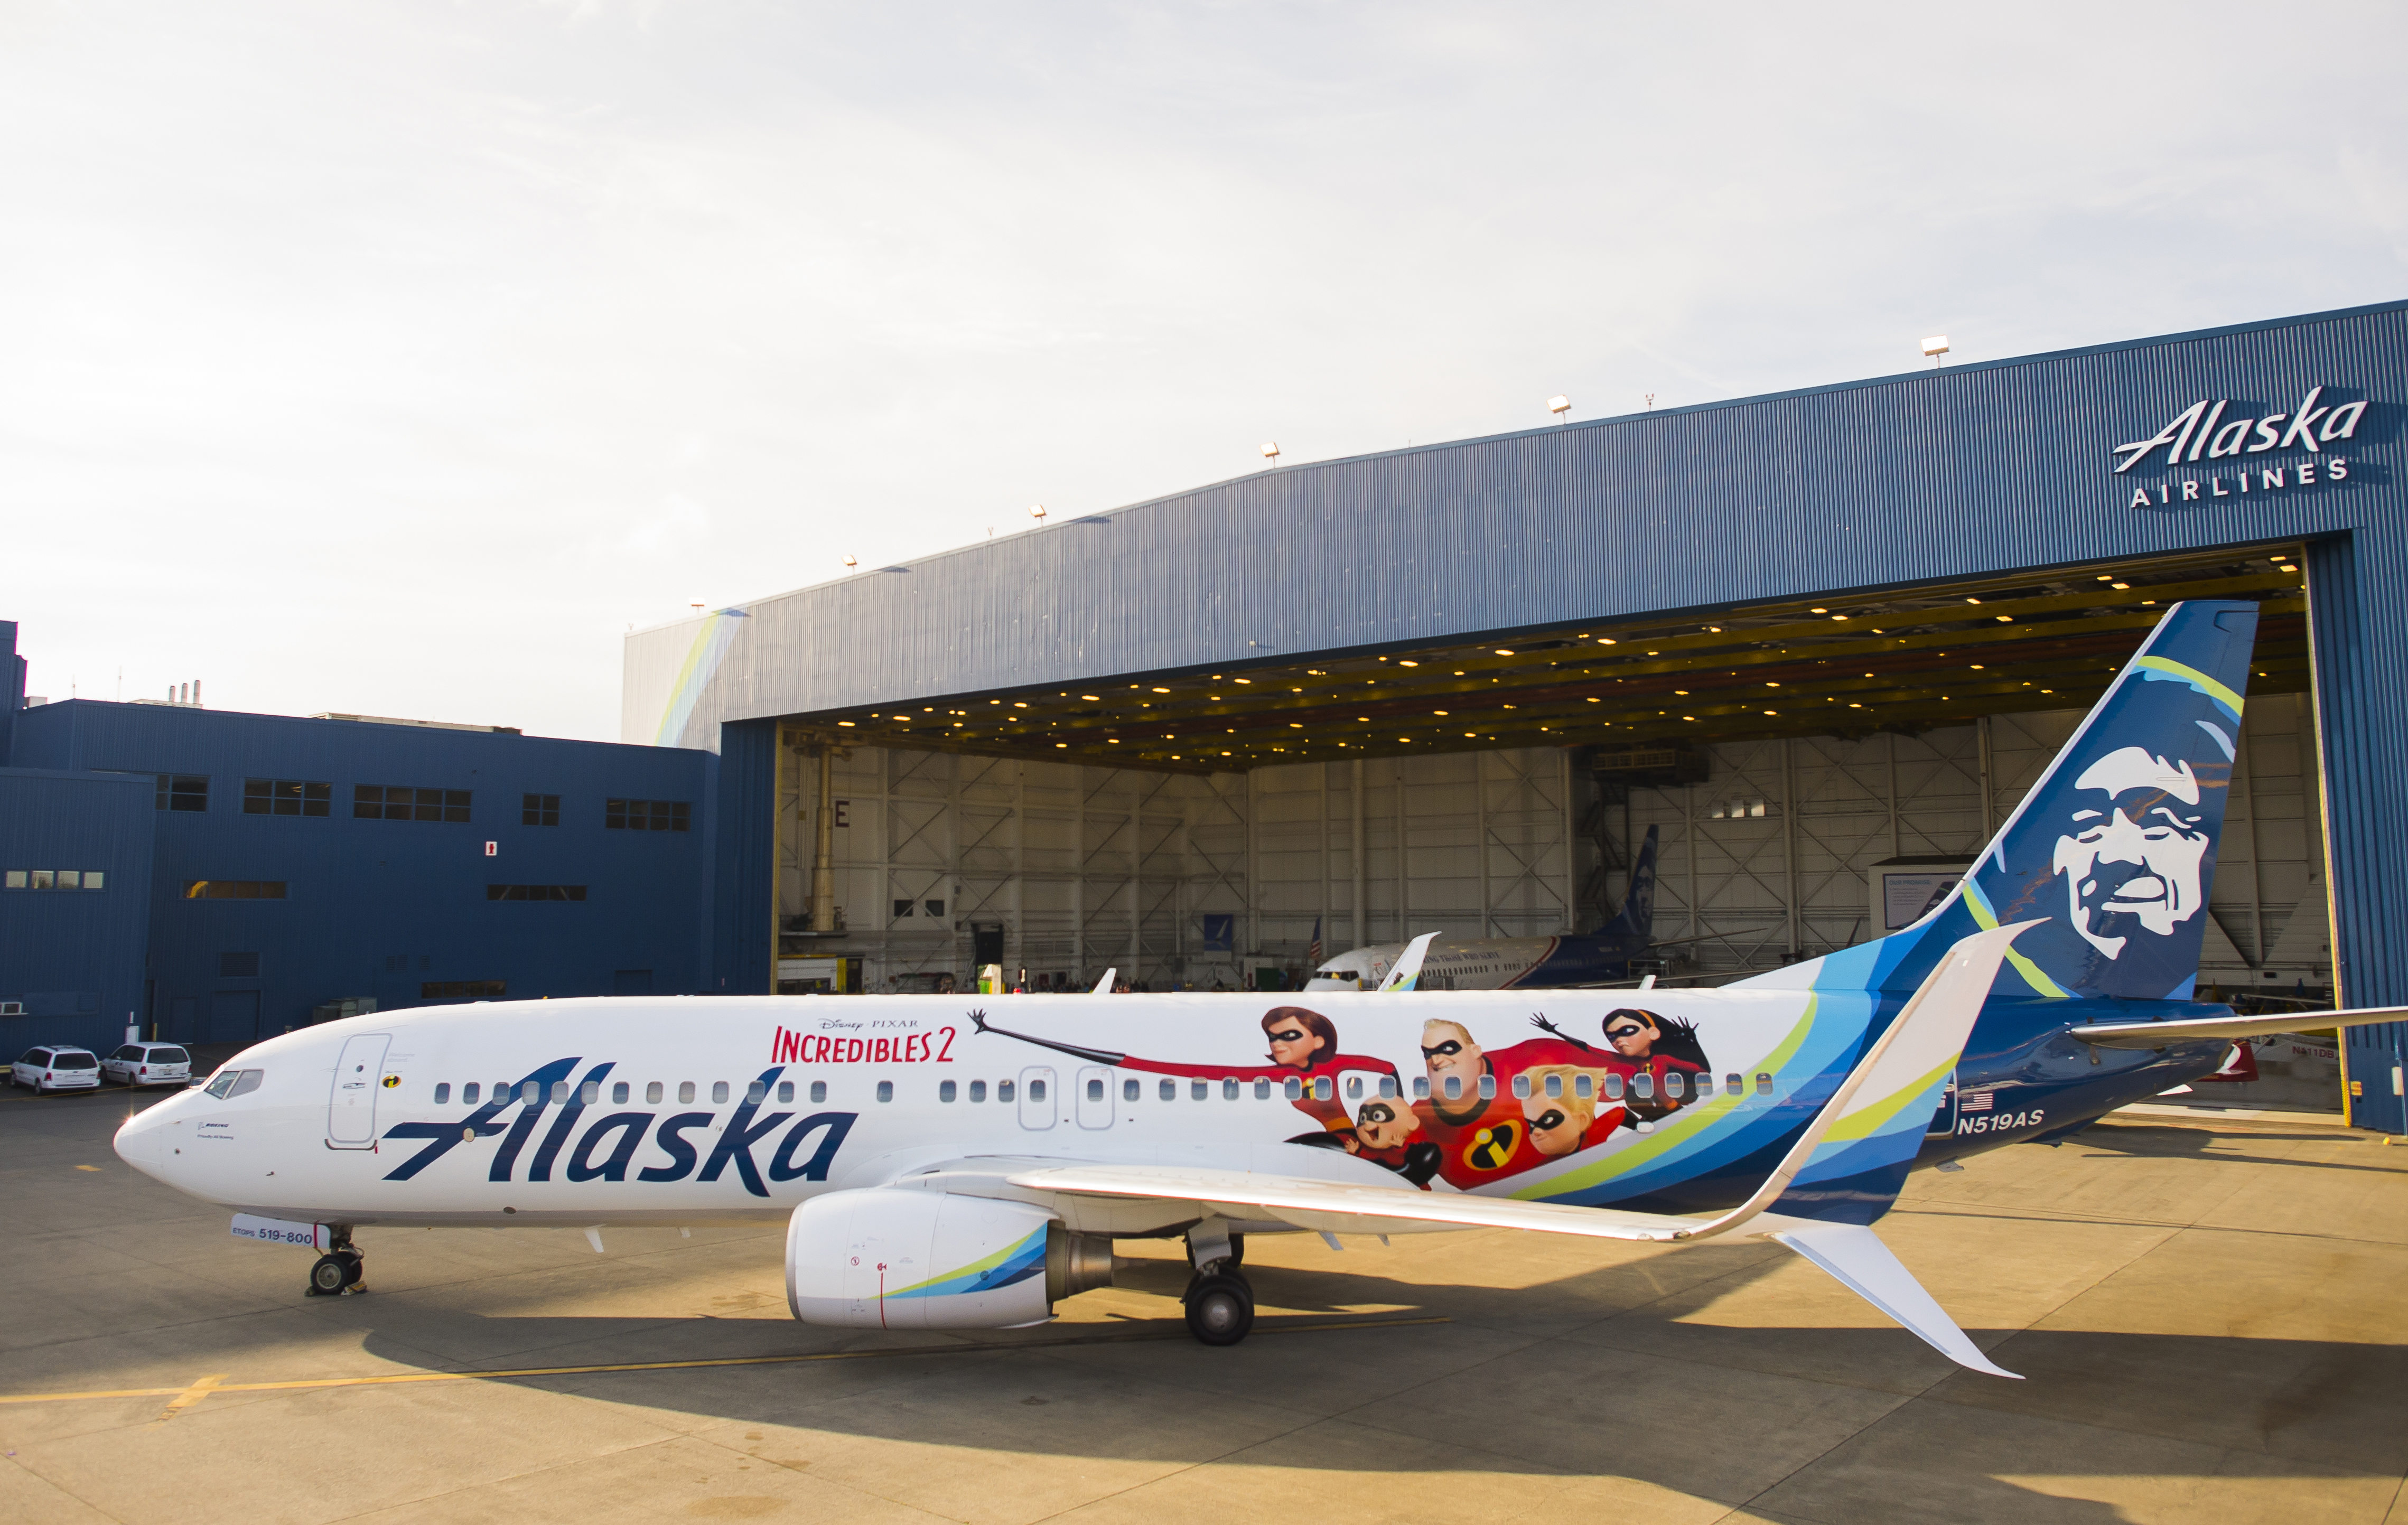 Alaska Airlines Unveils Incredibles 2 Themed Plane